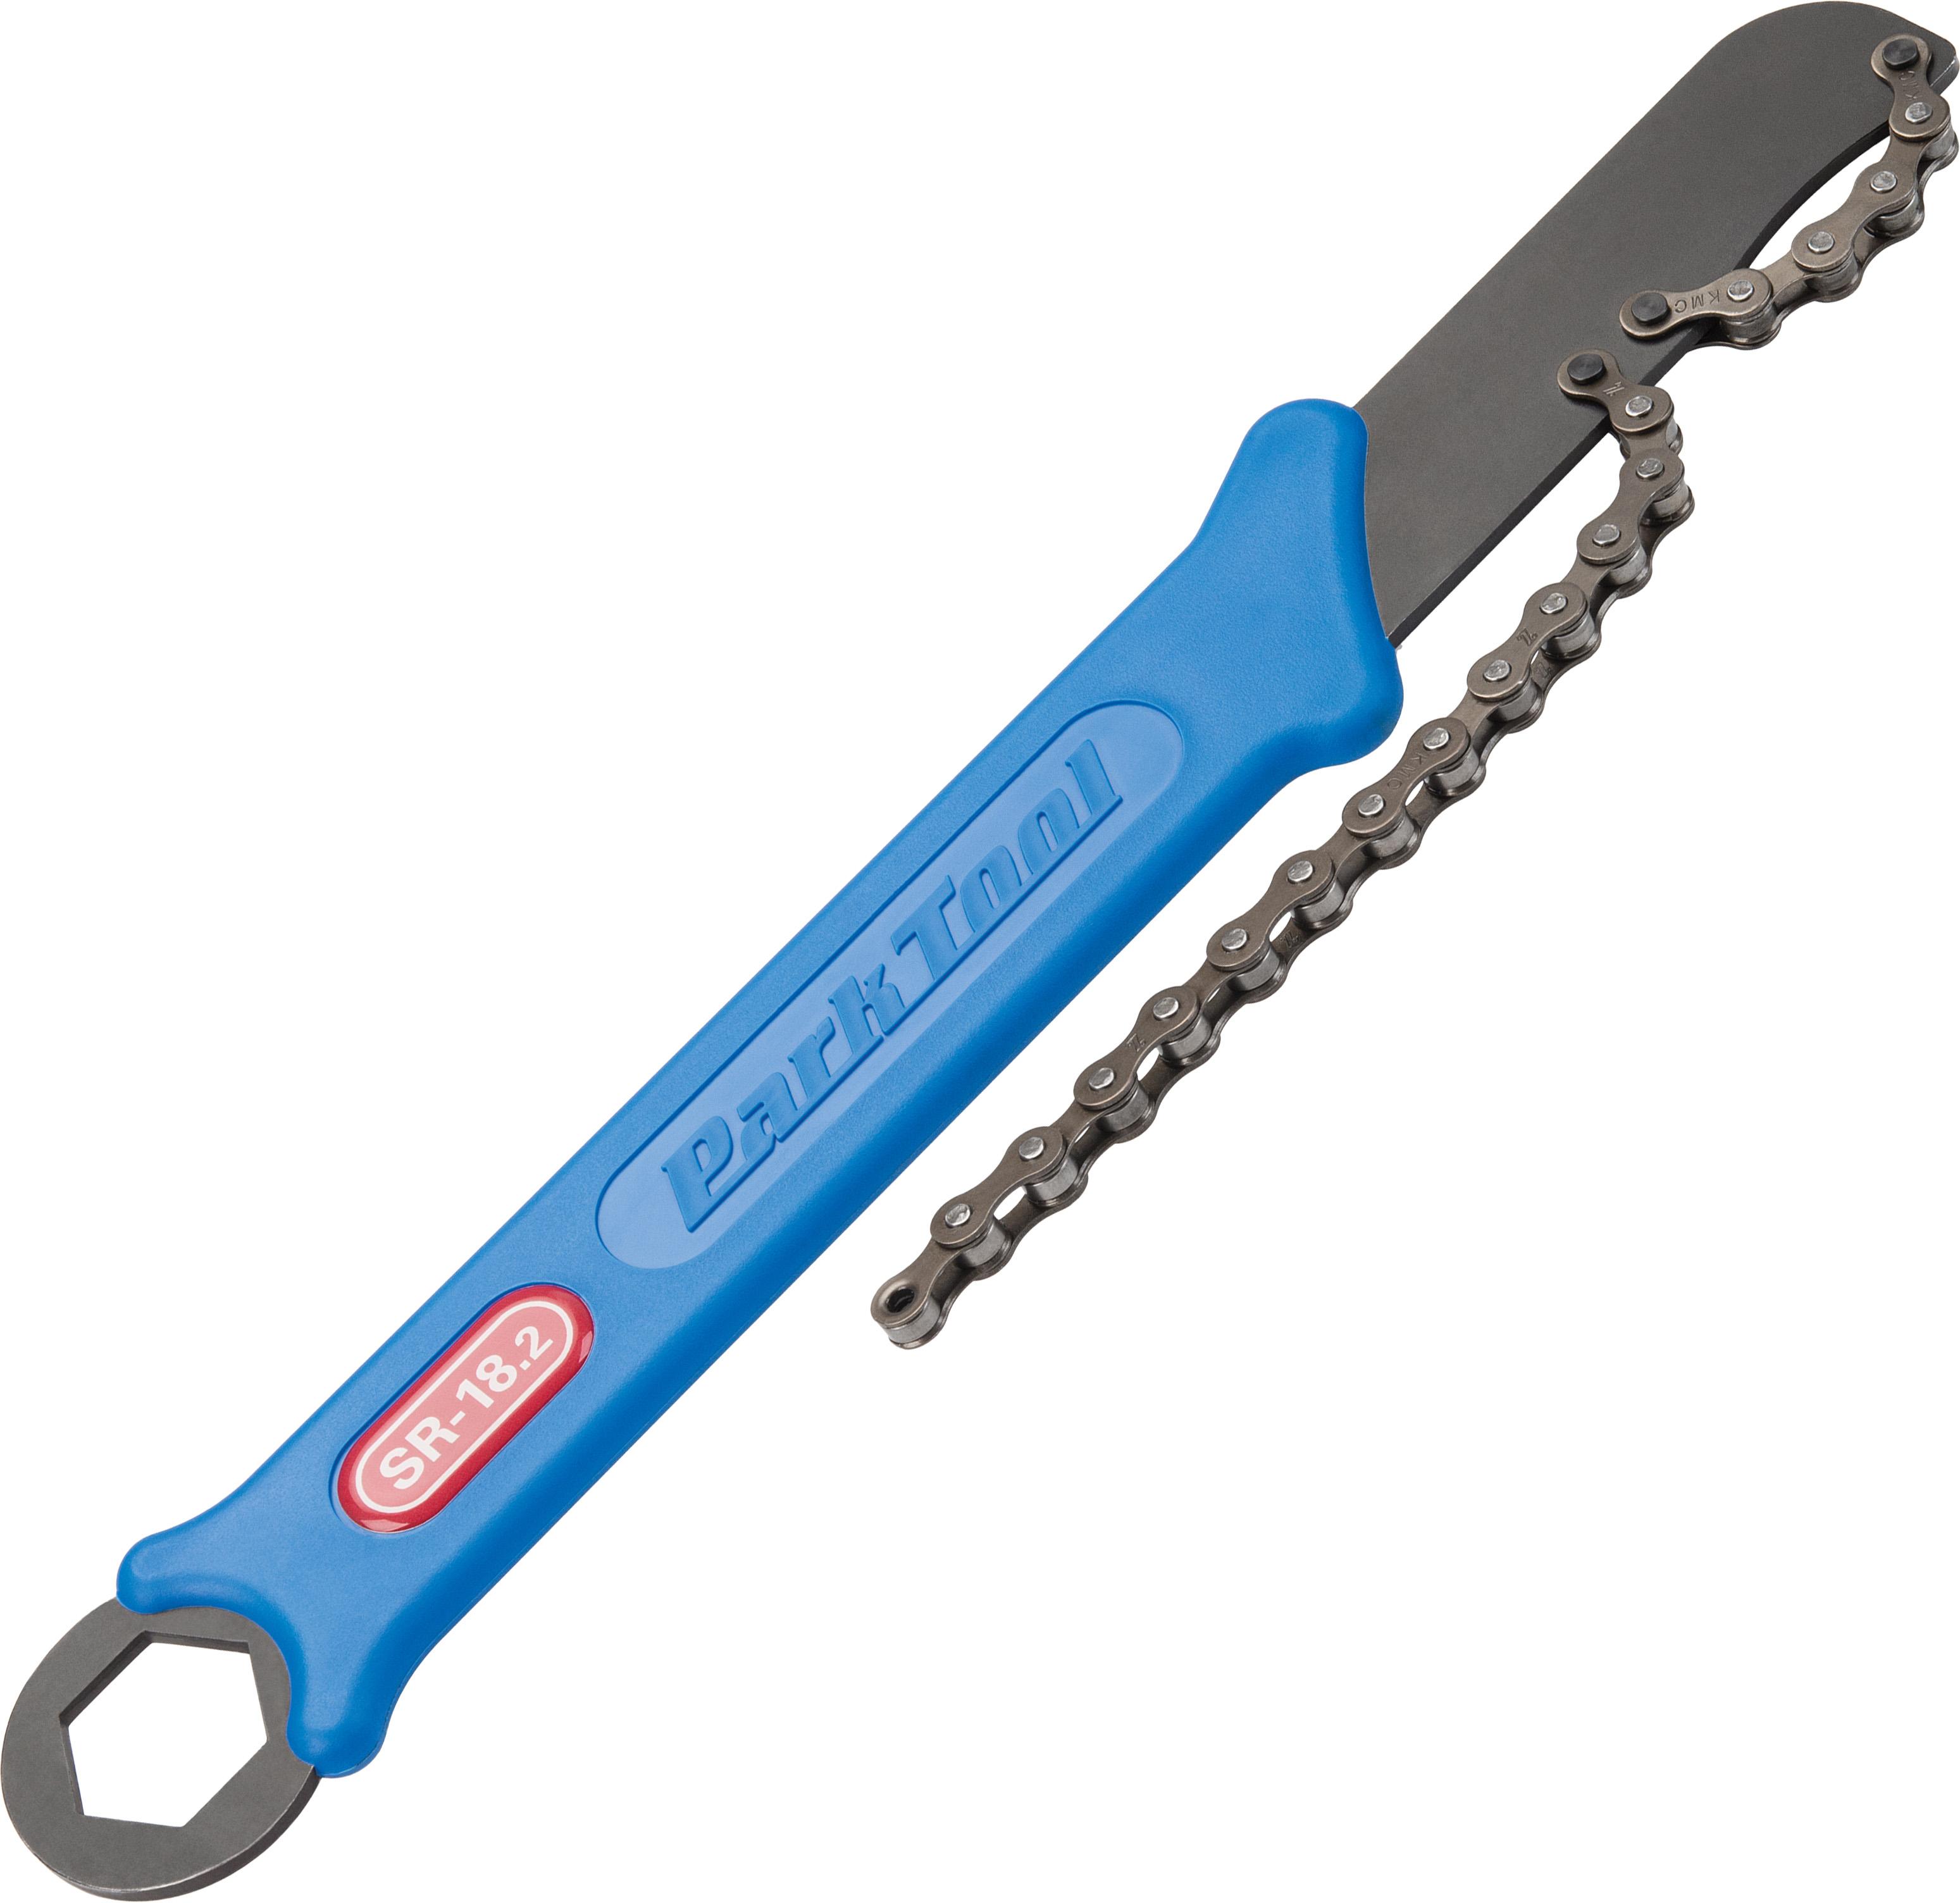 Park Tool Sprocket Remover And Chain Whip Sr-18.2 - Blue